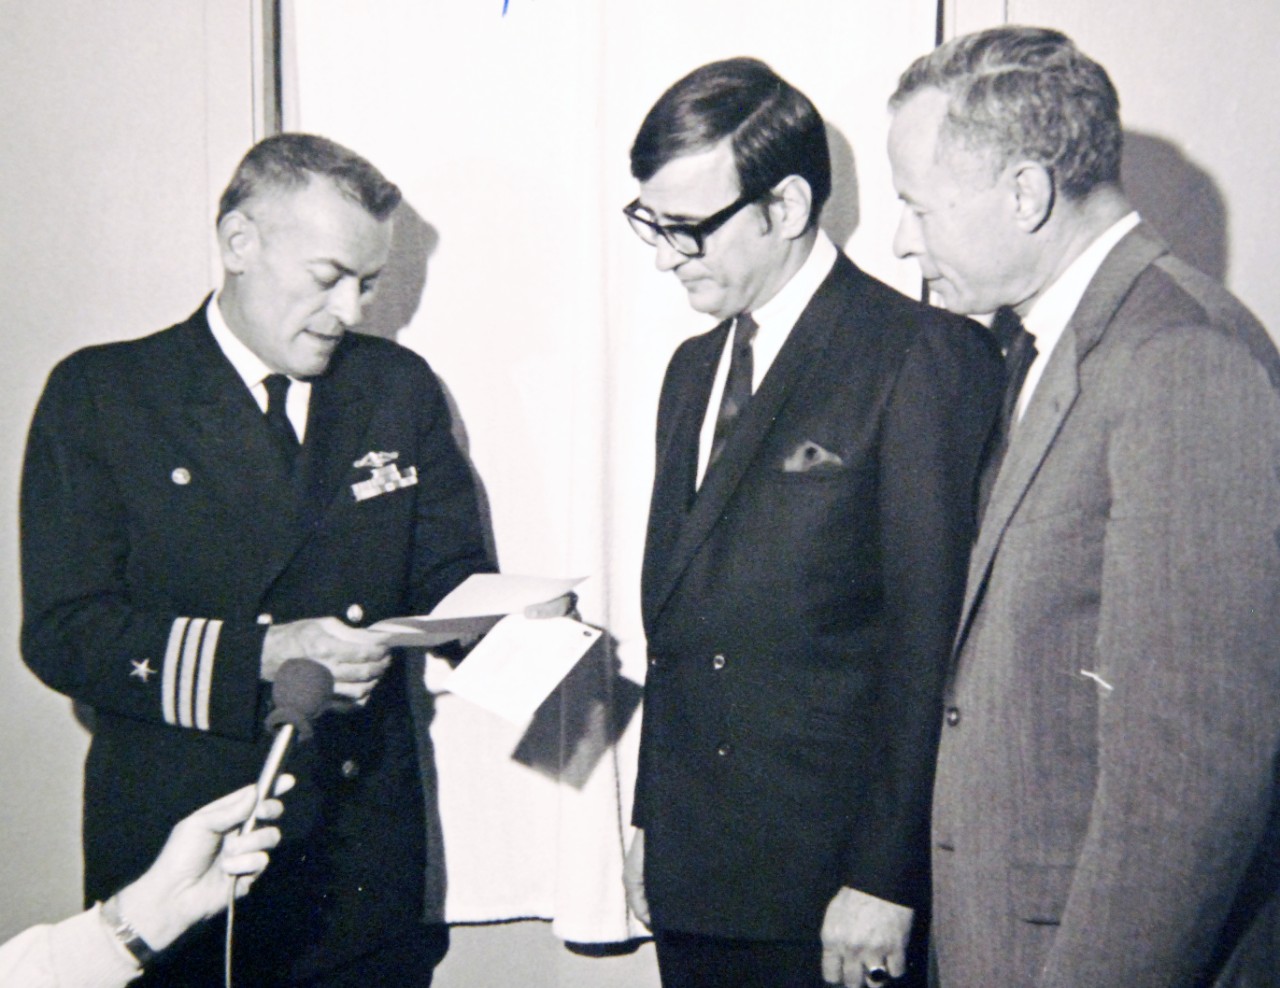 428-GX-USN-1140159:   U.S. Naval Air Station, North Island, California, February 6, 1969.    Commander Lloyd M. Bucher, Commanding Officer of USS Pueblo (AGER-2) reads a citation from the American Broadcasting Company’s “Wide World of Sports” program personnel during a party.  Official U.S. Navy Photograph, now in the collections of the National Archives (2017/05/23).  Photographed from reference card. 